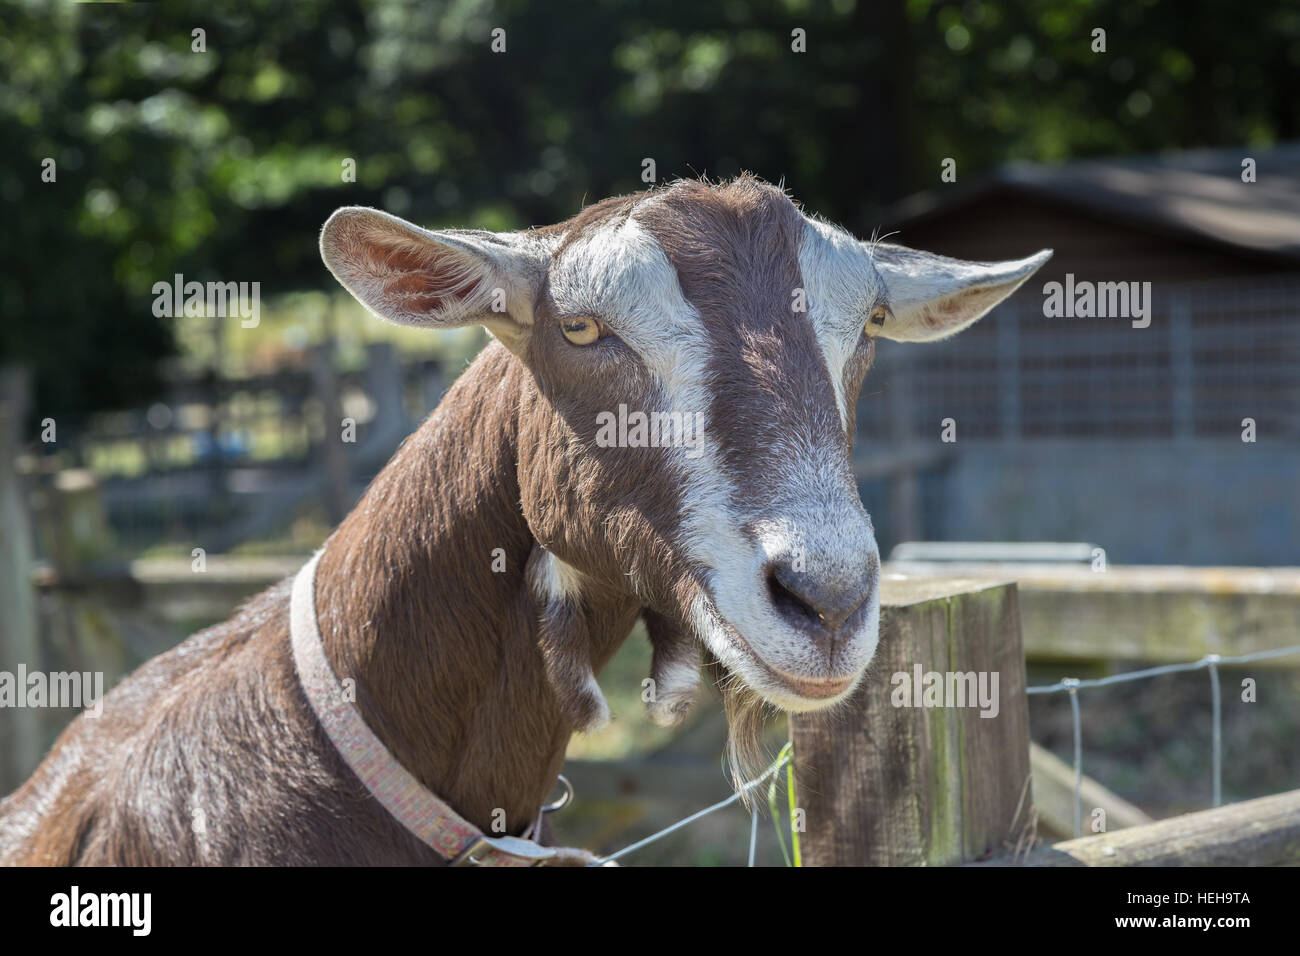 Close up of a goat's head, he looks friendly and like he's smiling.  He's close to the fence and was very curious. Stock Photo